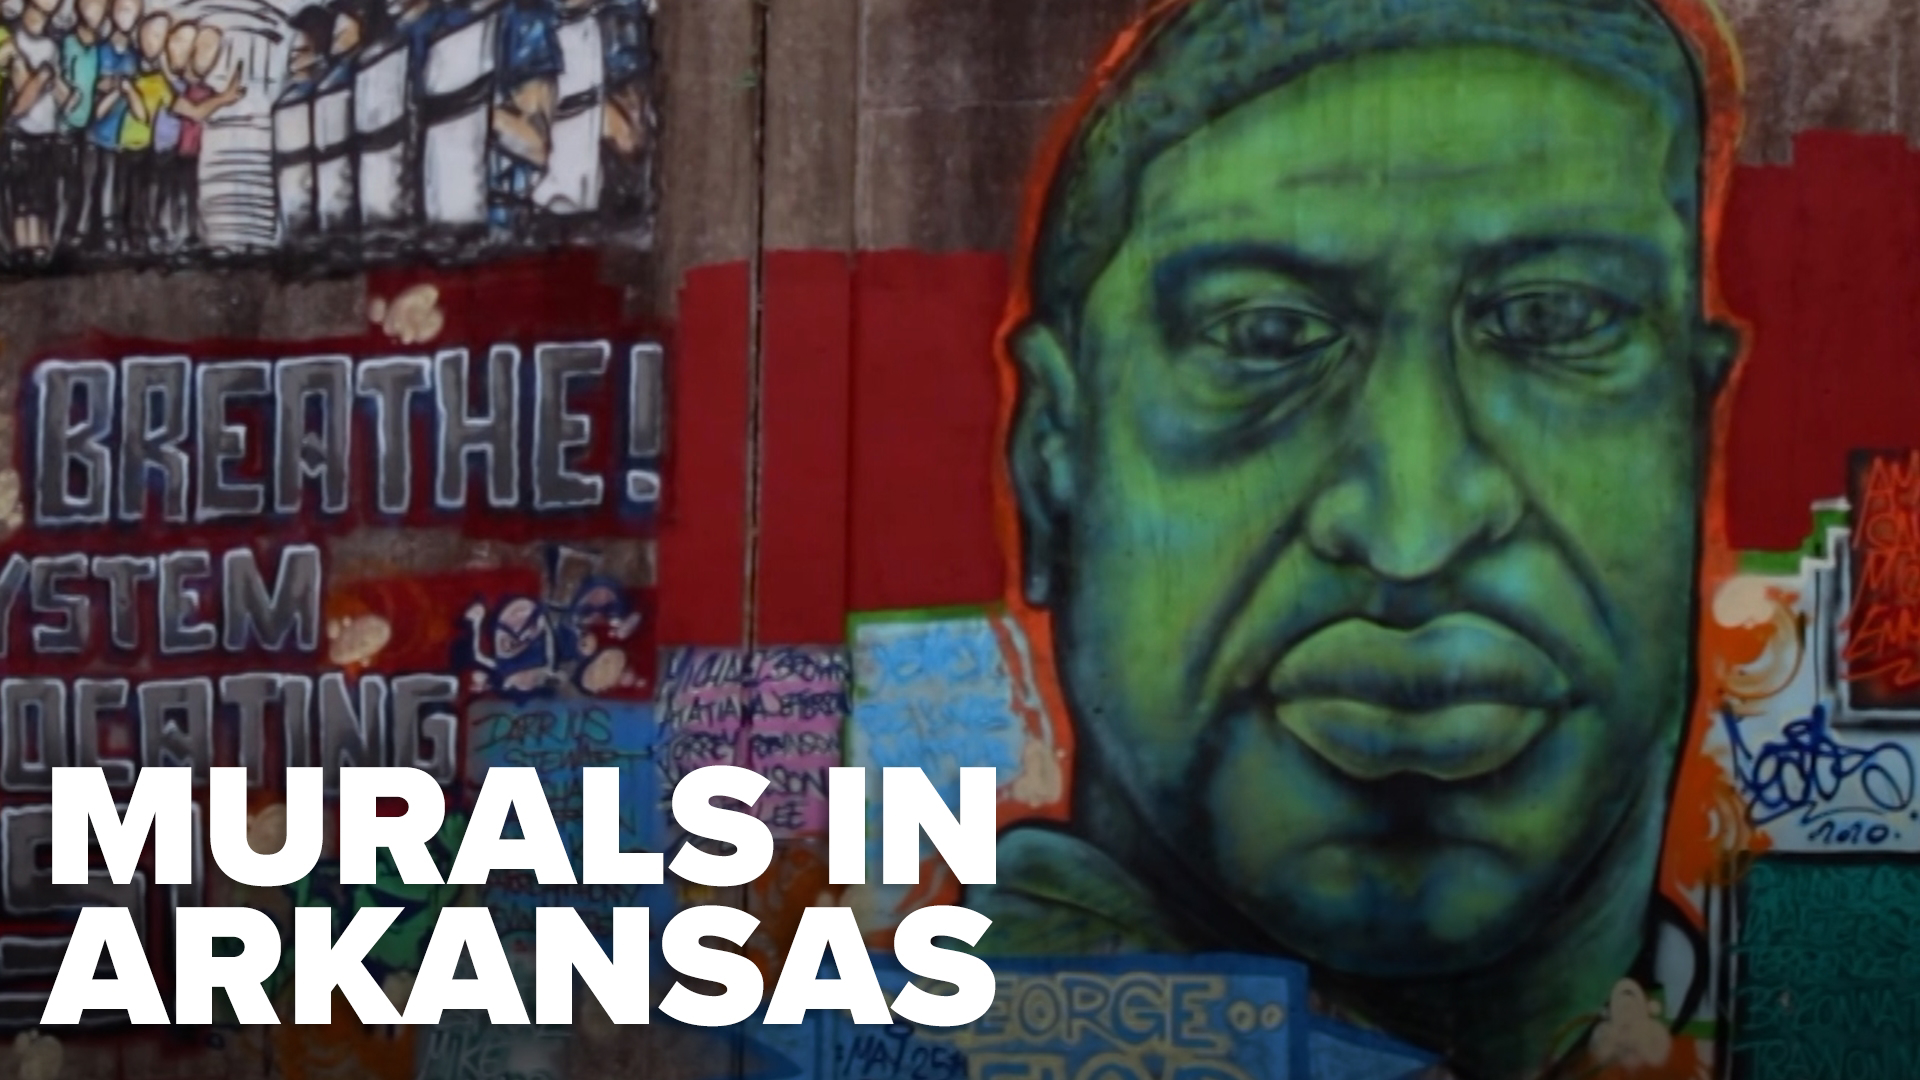 In 2019 and 2020, Craig O'Neill went around Arkansas to look at all the beautiful murals that have popped up towns big and small.